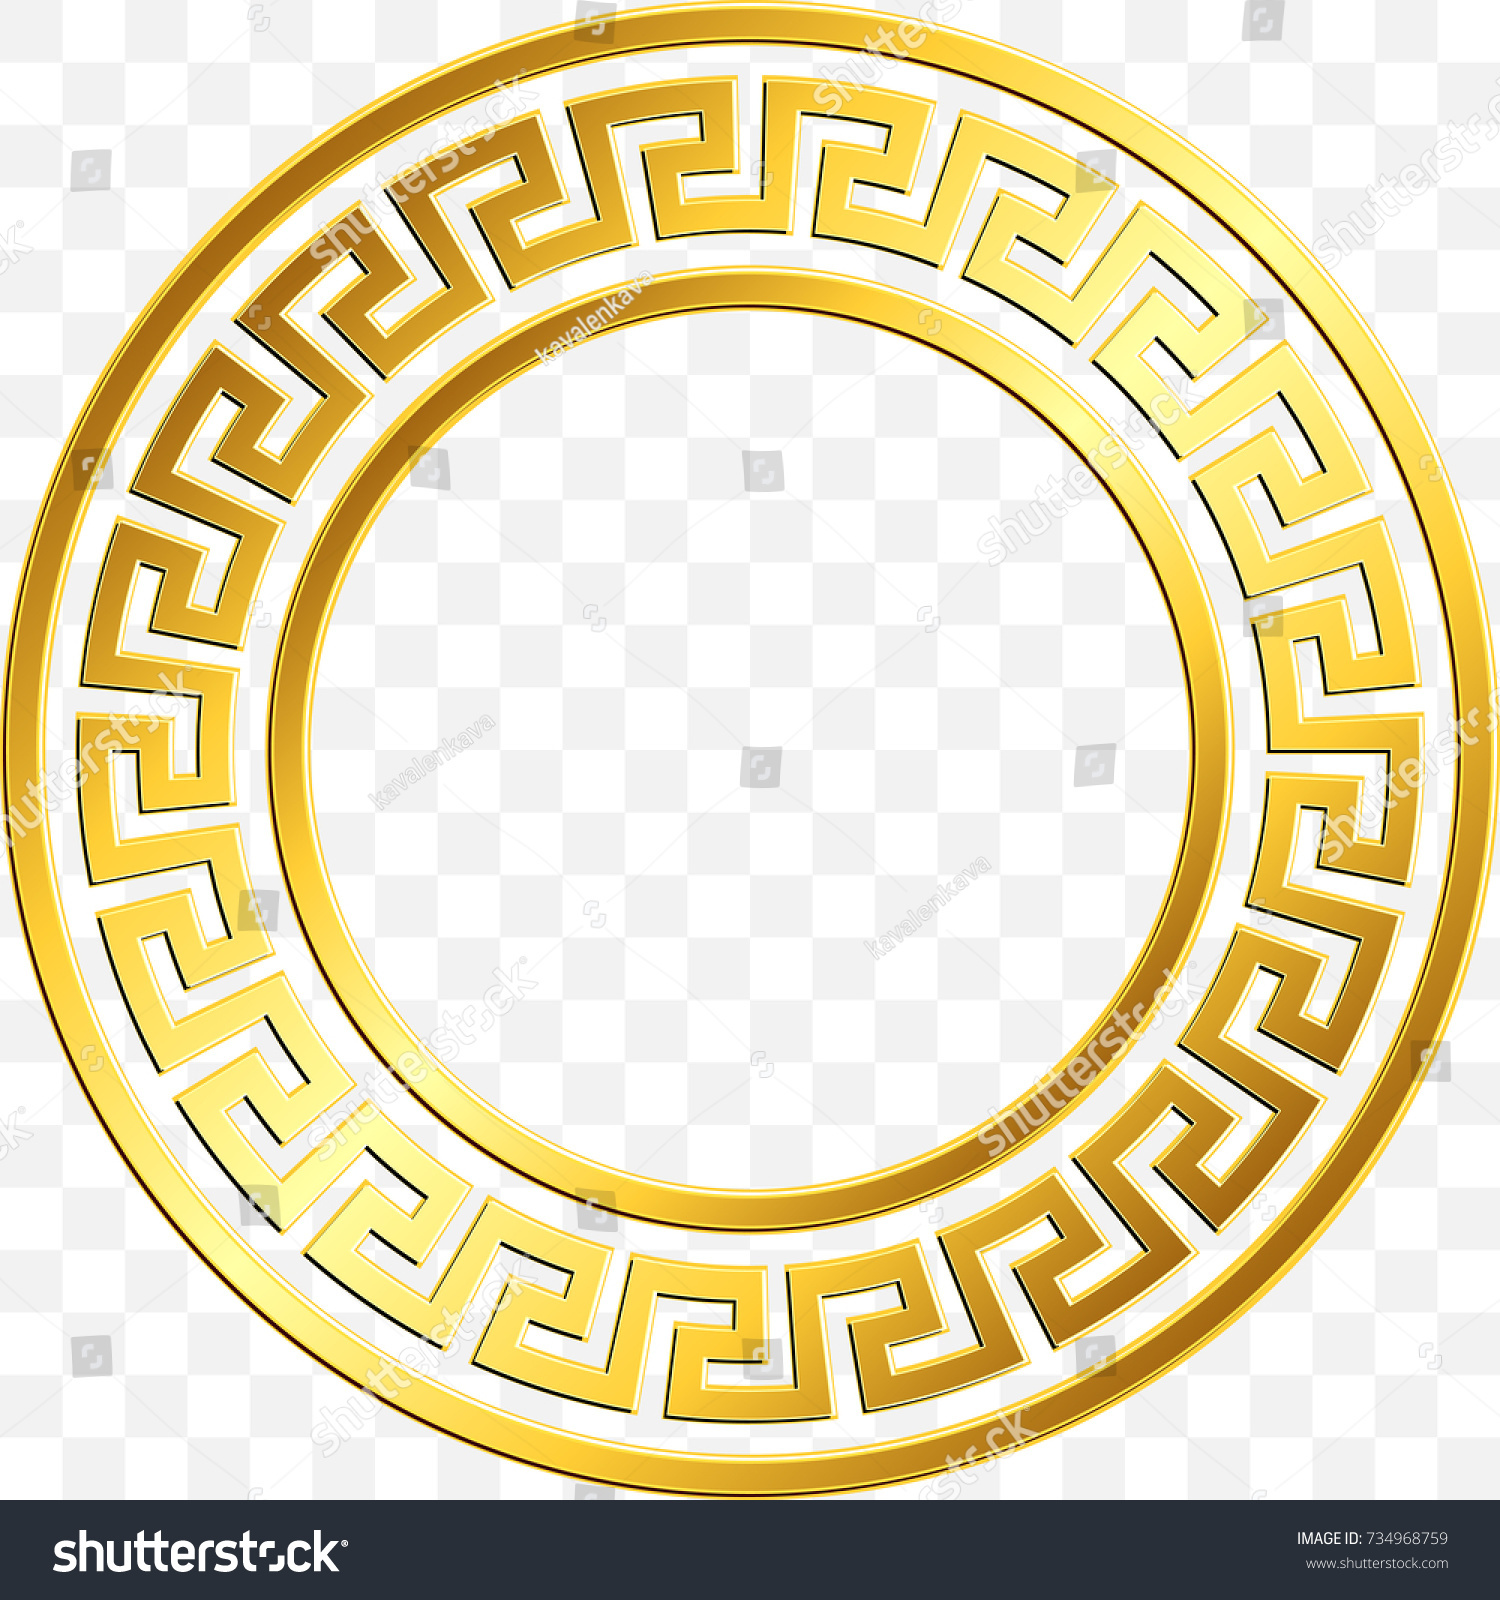 Round Frame Traditional Vintage Golden Greek Stock Vector (Royalty Free ...